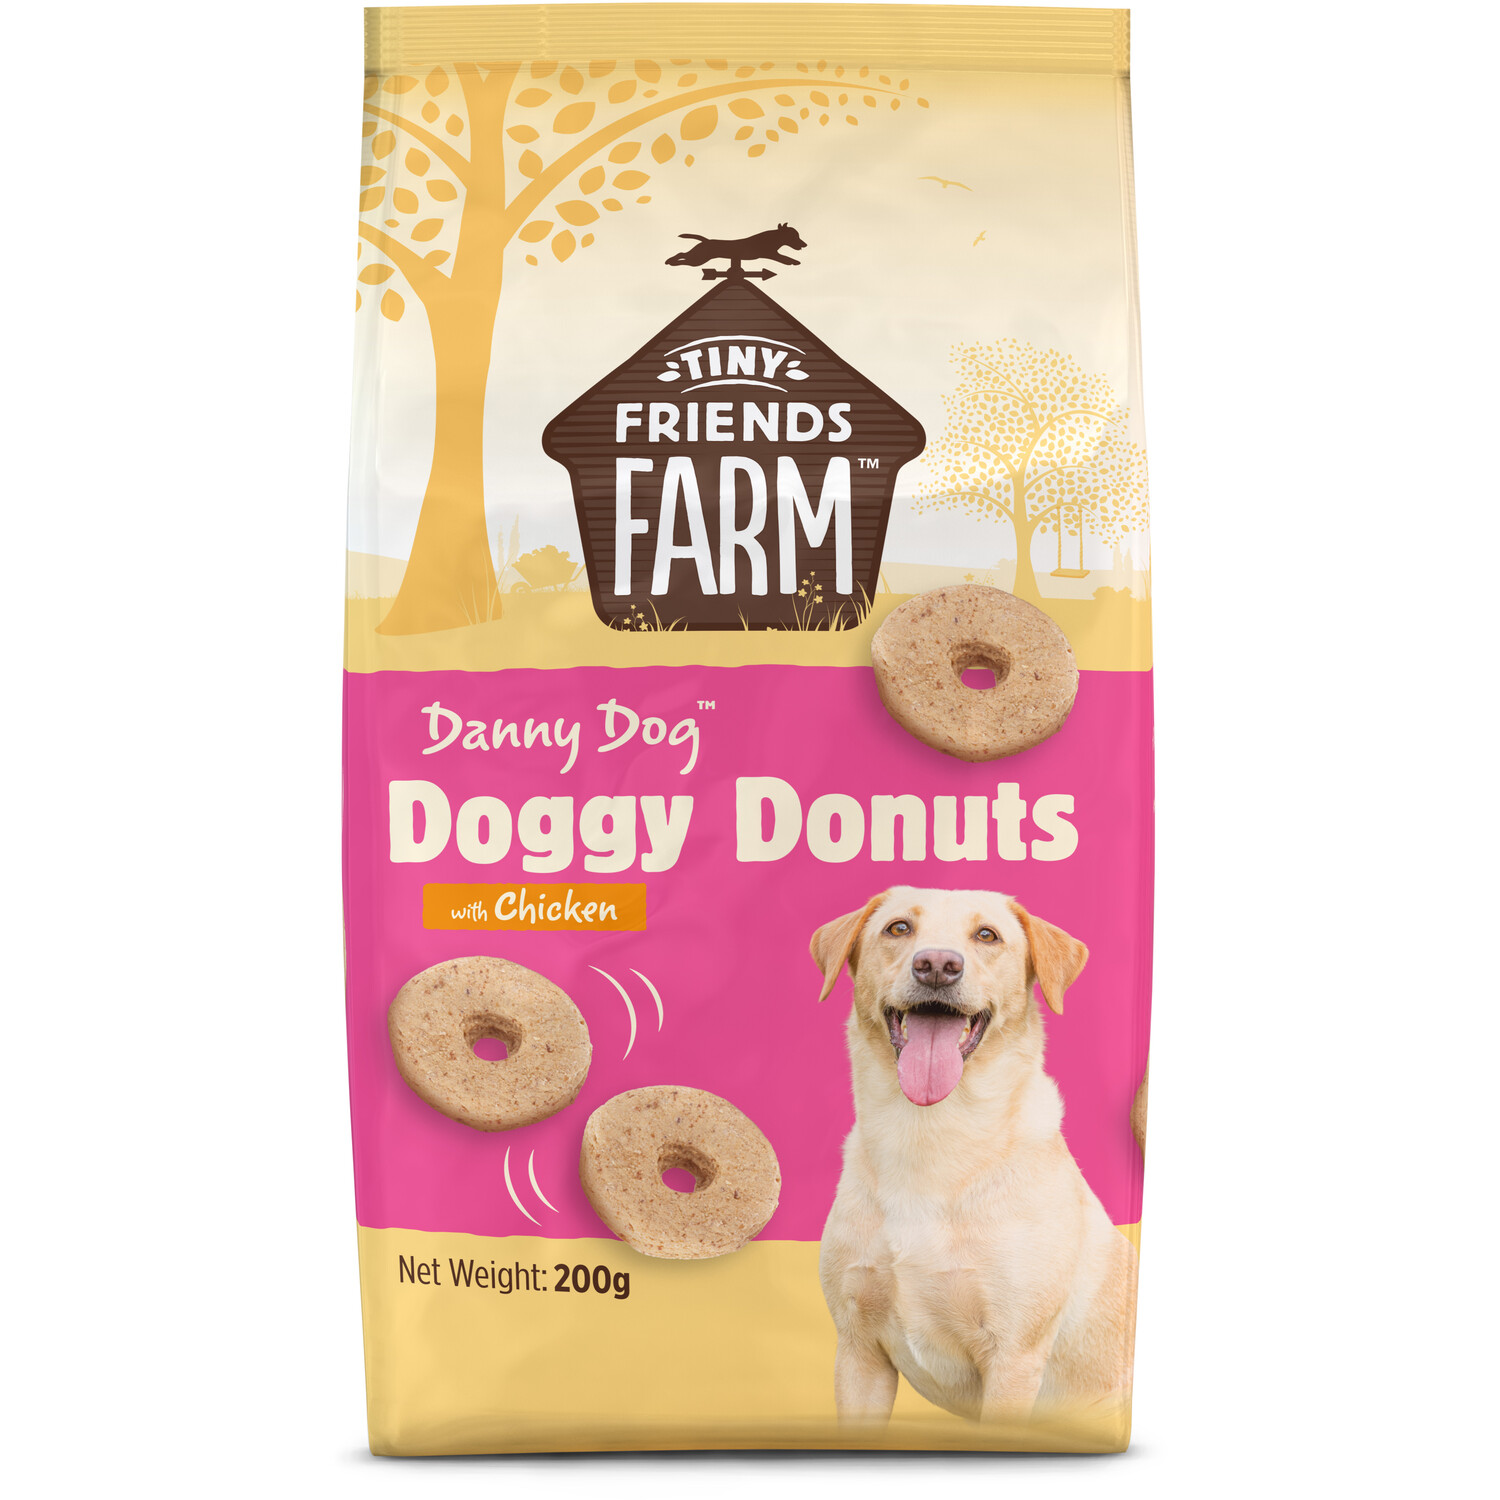 Doggy Donuts with Chicken Image 1